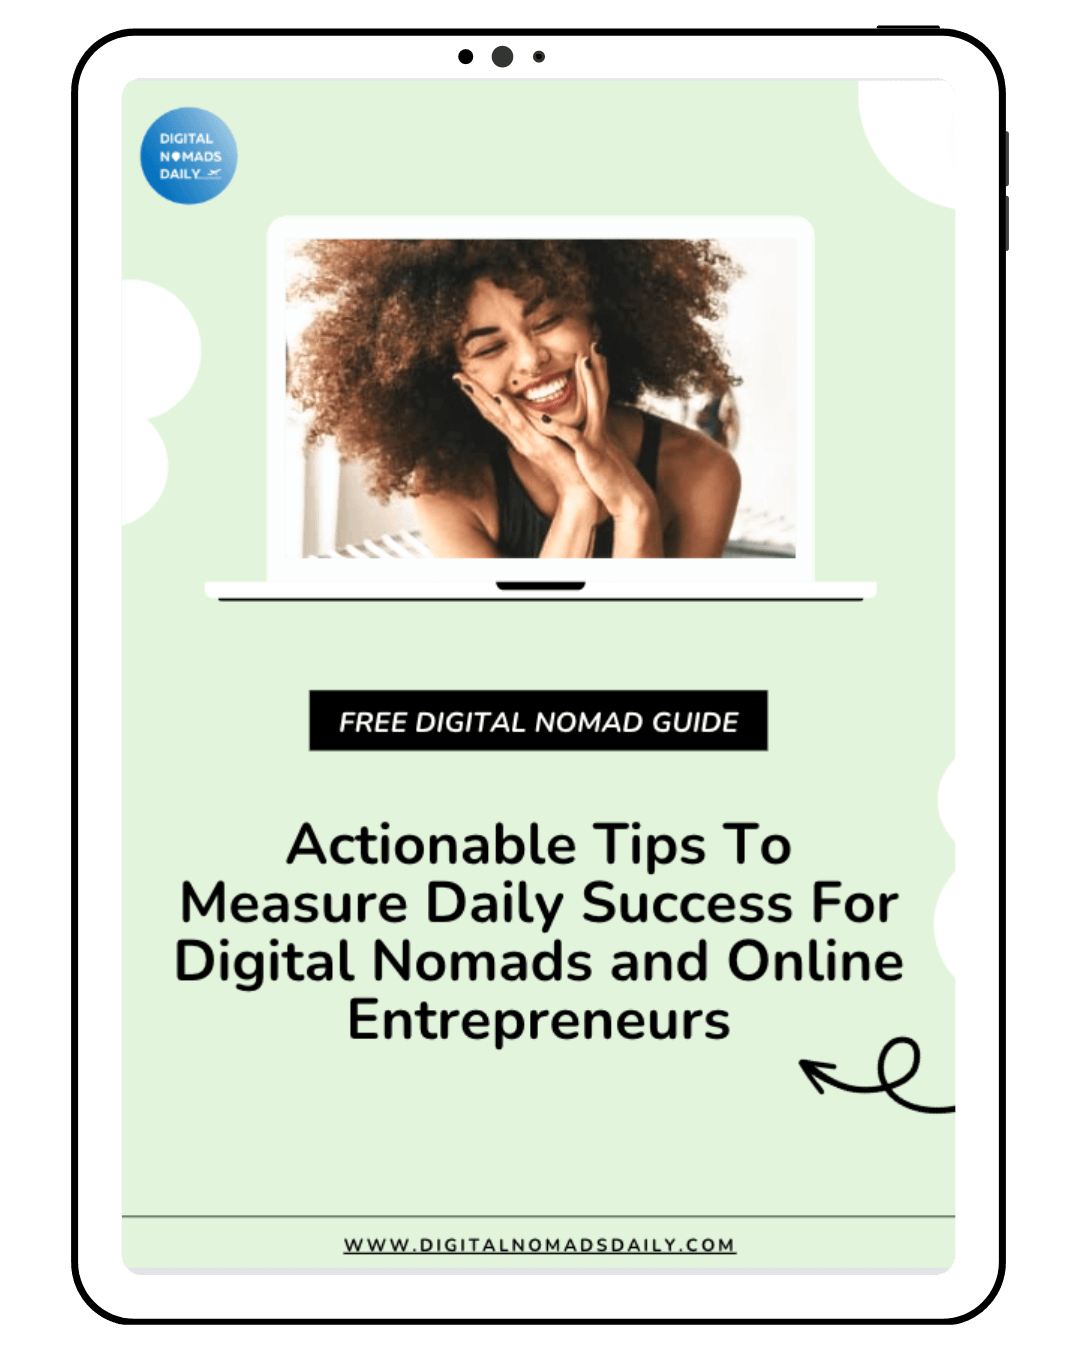 Nienke Nina host of the digital nomads daily podcast making your side hustle successful